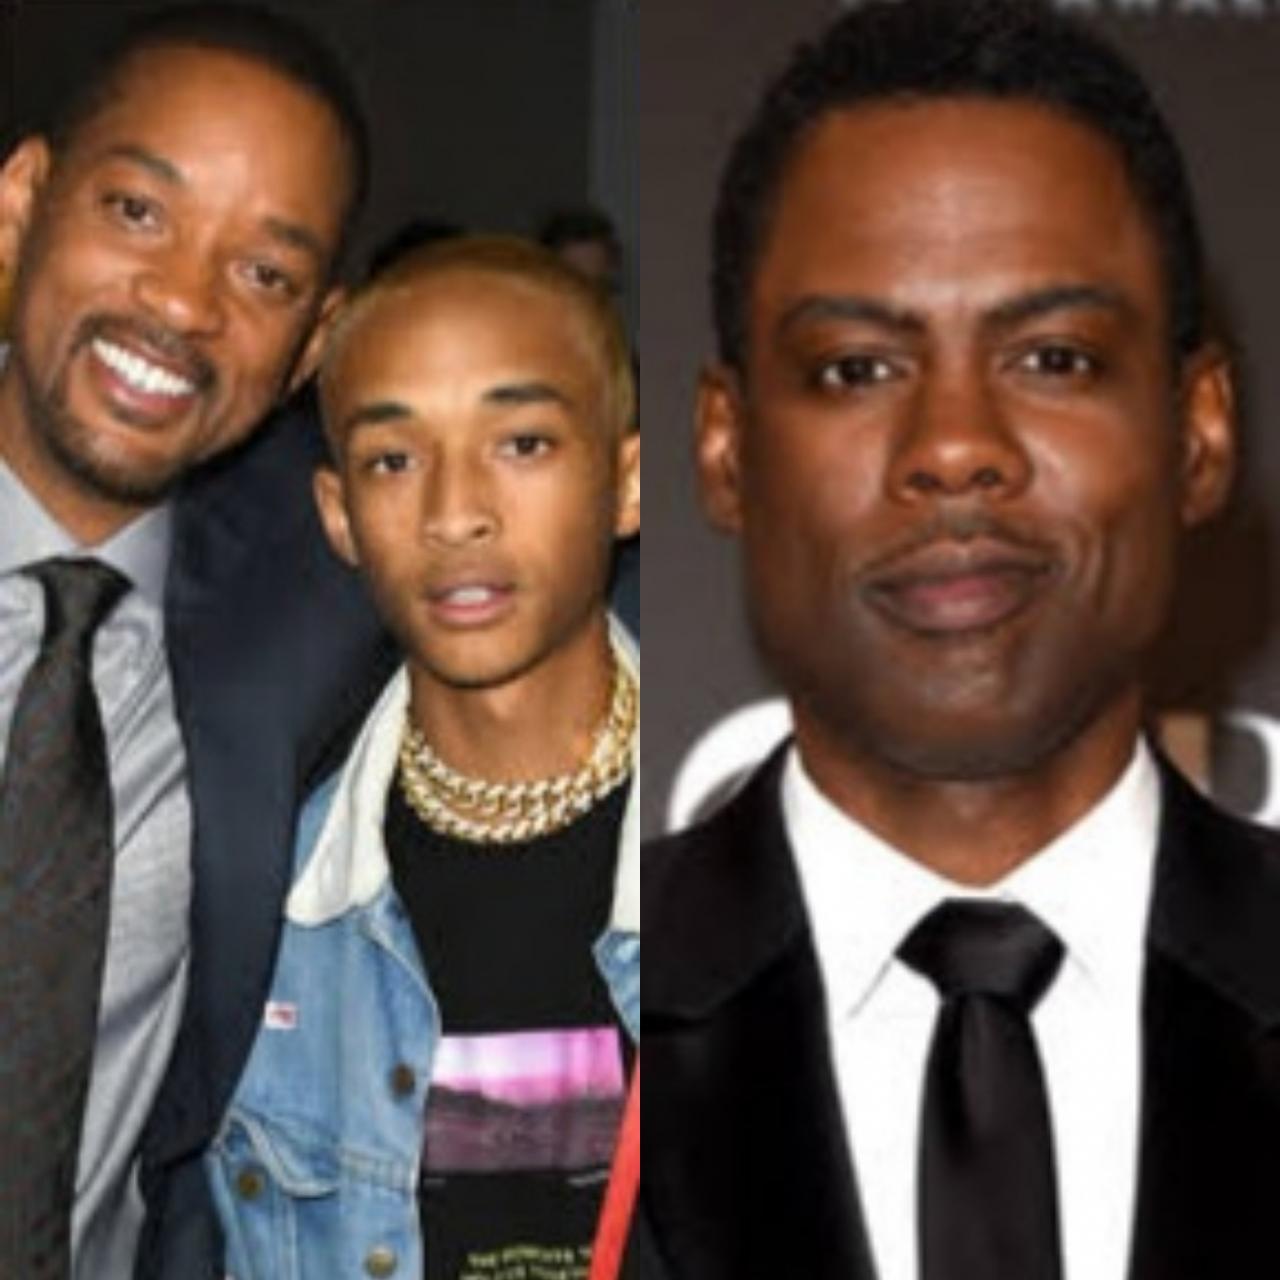 Jaden Smith reacts after his dad Will Smith slapped Chris Rock for making joke about his mother Jada Smith